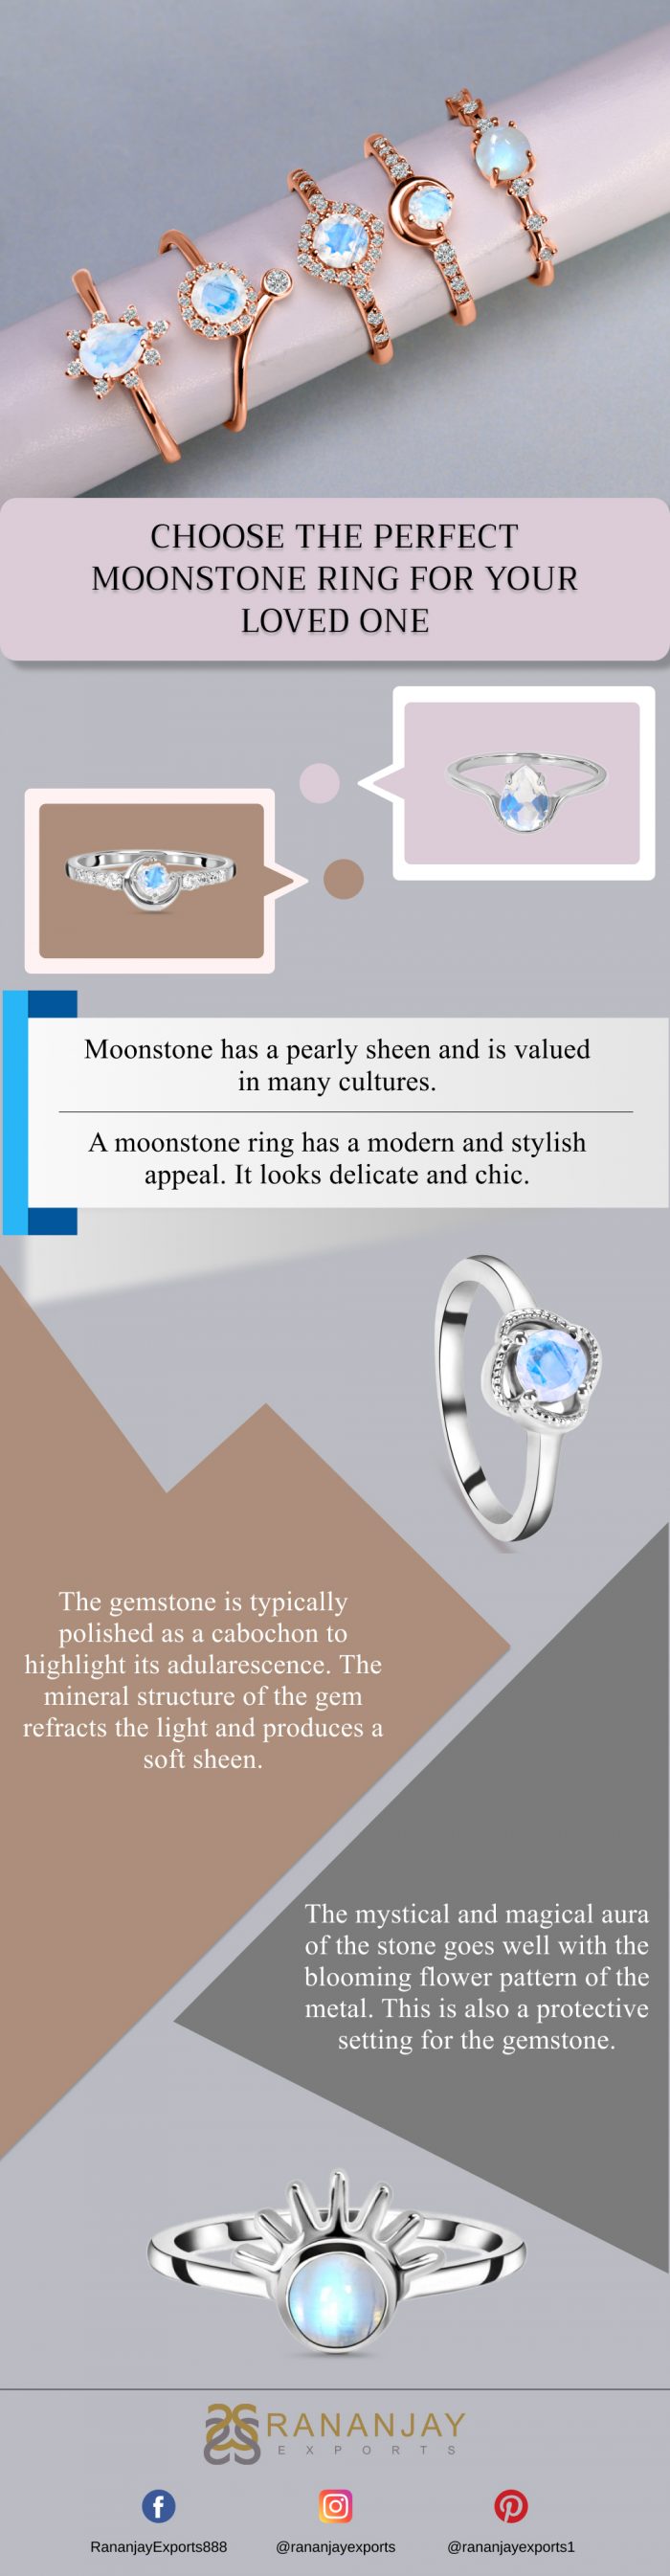 Buy Online Moonstone Ring at Affordable Prices